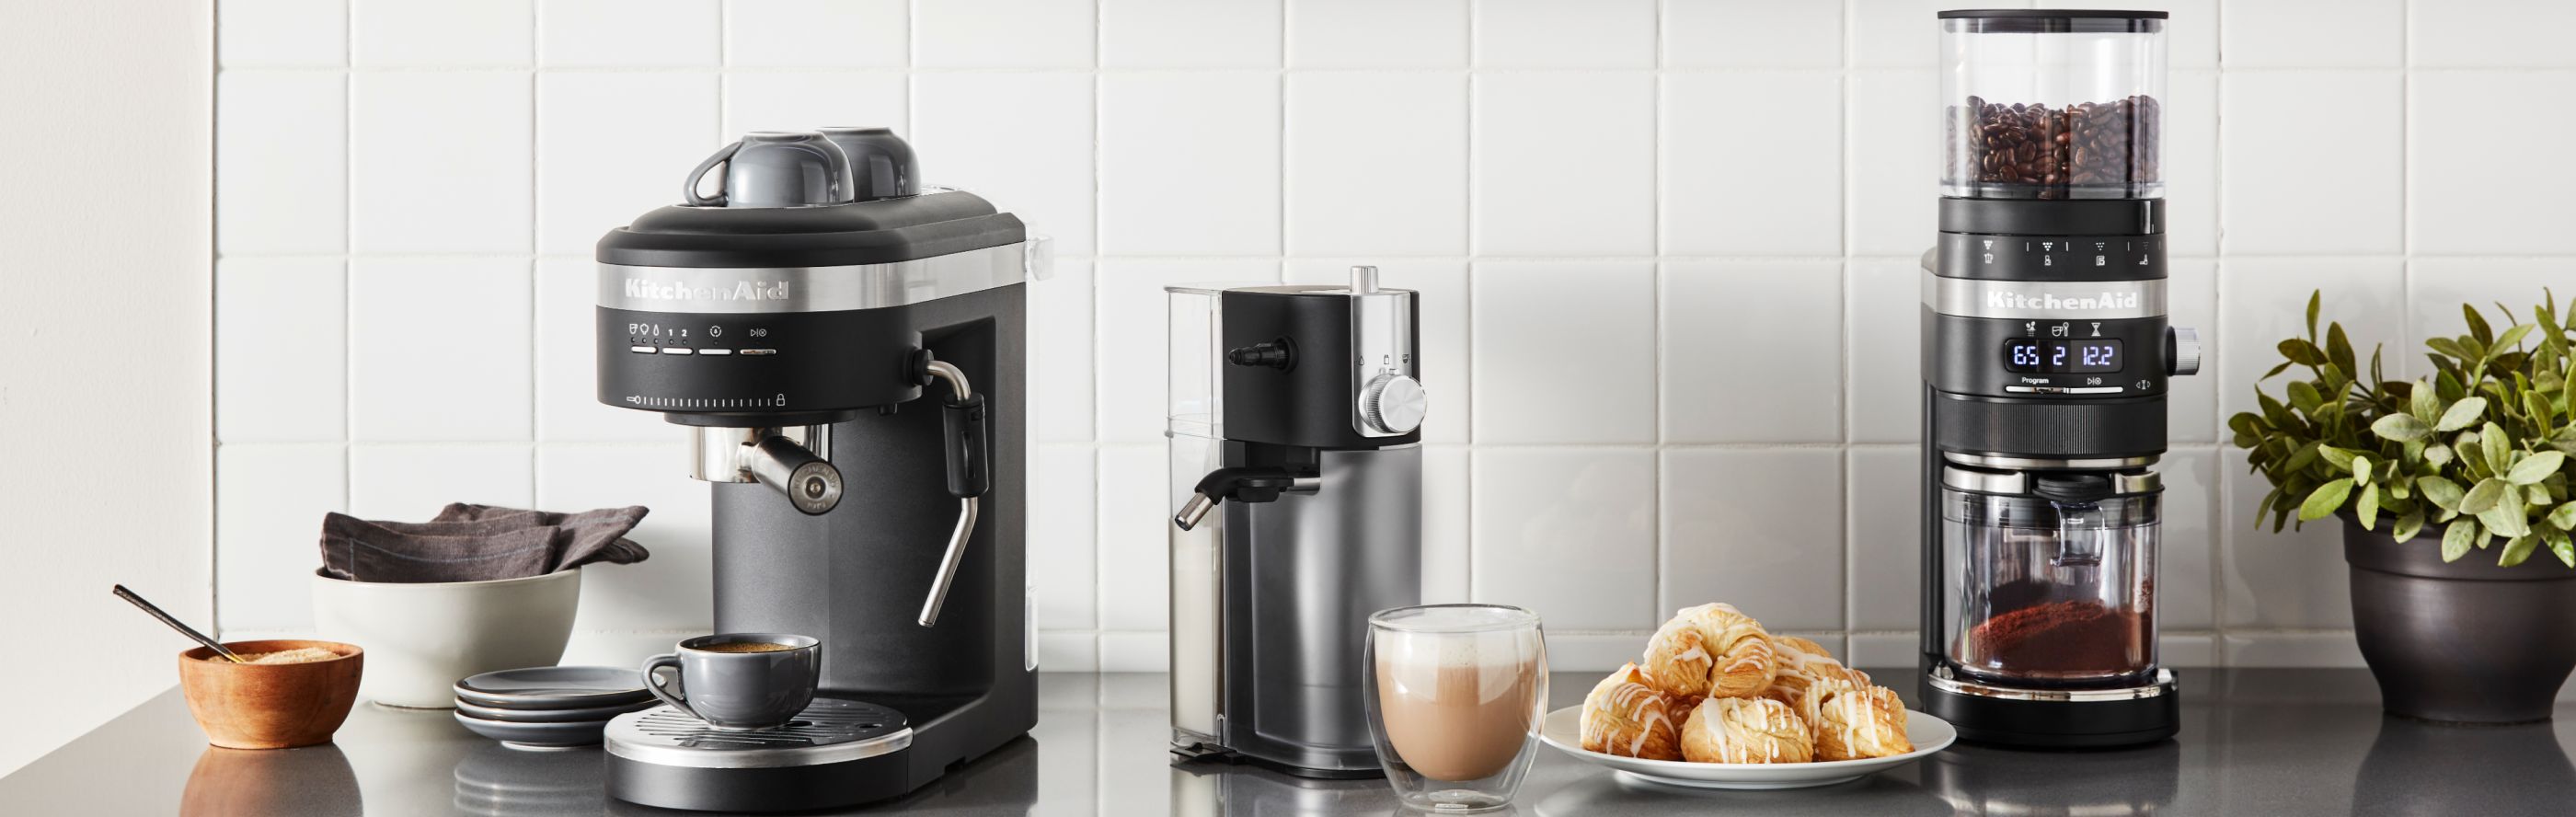 A KitchenAid® espresso machine and burr coffee grinder in a modern kitchen next to a frothy cappuccino and pastries.